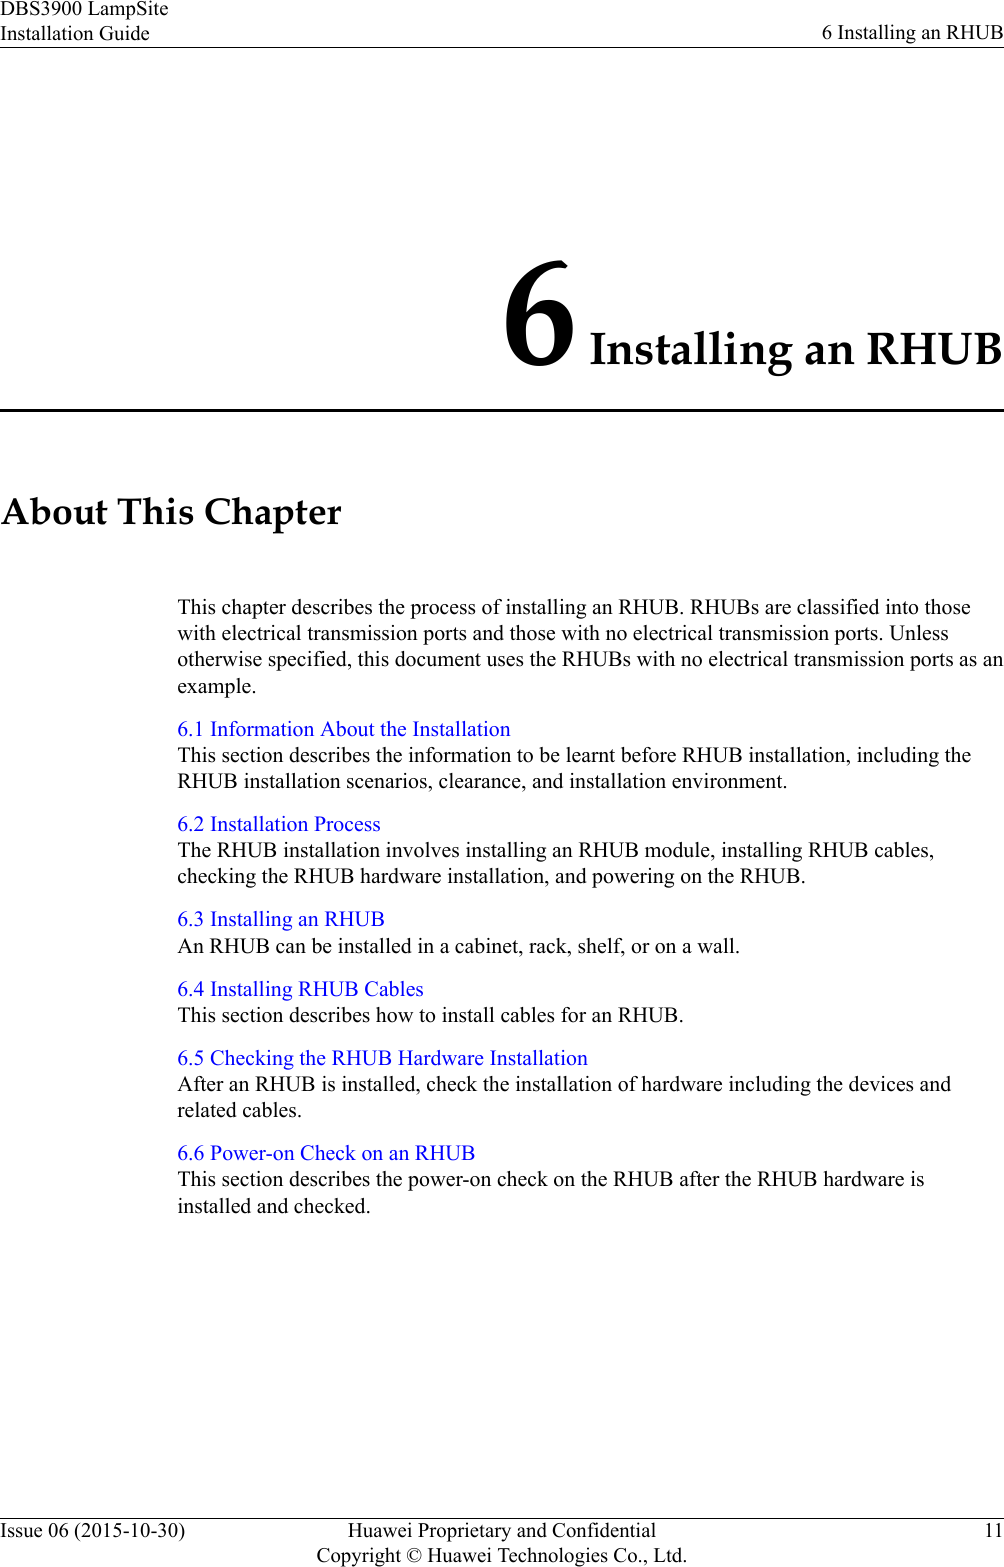 6 Installing an RHUBAbout This ChapterThis chapter describes the process of installing an RHUB. RHUBs are classified into thosewith electrical transmission ports and those with no electrical transmission ports. Unlessotherwise specified, this document uses the RHUBs with no electrical transmission ports as anexample.6.1 Information About the InstallationThis section describes the information to be learnt before RHUB installation, including theRHUB installation scenarios, clearance, and installation environment.6.2 Installation ProcessThe RHUB installation involves installing an RHUB module, installing RHUB cables,checking the RHUB hardware installation, and powering on the RHUB.6.3 Installing an RHUBAn RHUB can be installed in a cabinet, rack, shelf, or on a wall.6.4 Installing RHUB CablesThis section describes how to install cables for an RHUB.6.5 Checking the RHUB Hardware InstallationAfter an RHUB is installed, check the installation of hardware including the devices andrelated cables.6.6 Power-on Check on an RHUBThis section describes the power-on check on the RHUB after the RHUB hardware isinstalled and checked.DBS3900 LampSiteInstallation Guide 6 Installing an RHUBIssue 06 (2015-10-30) Huawei Proprietary and ConfidentialCopyright © Huawei Technologies Co., Ltd.11